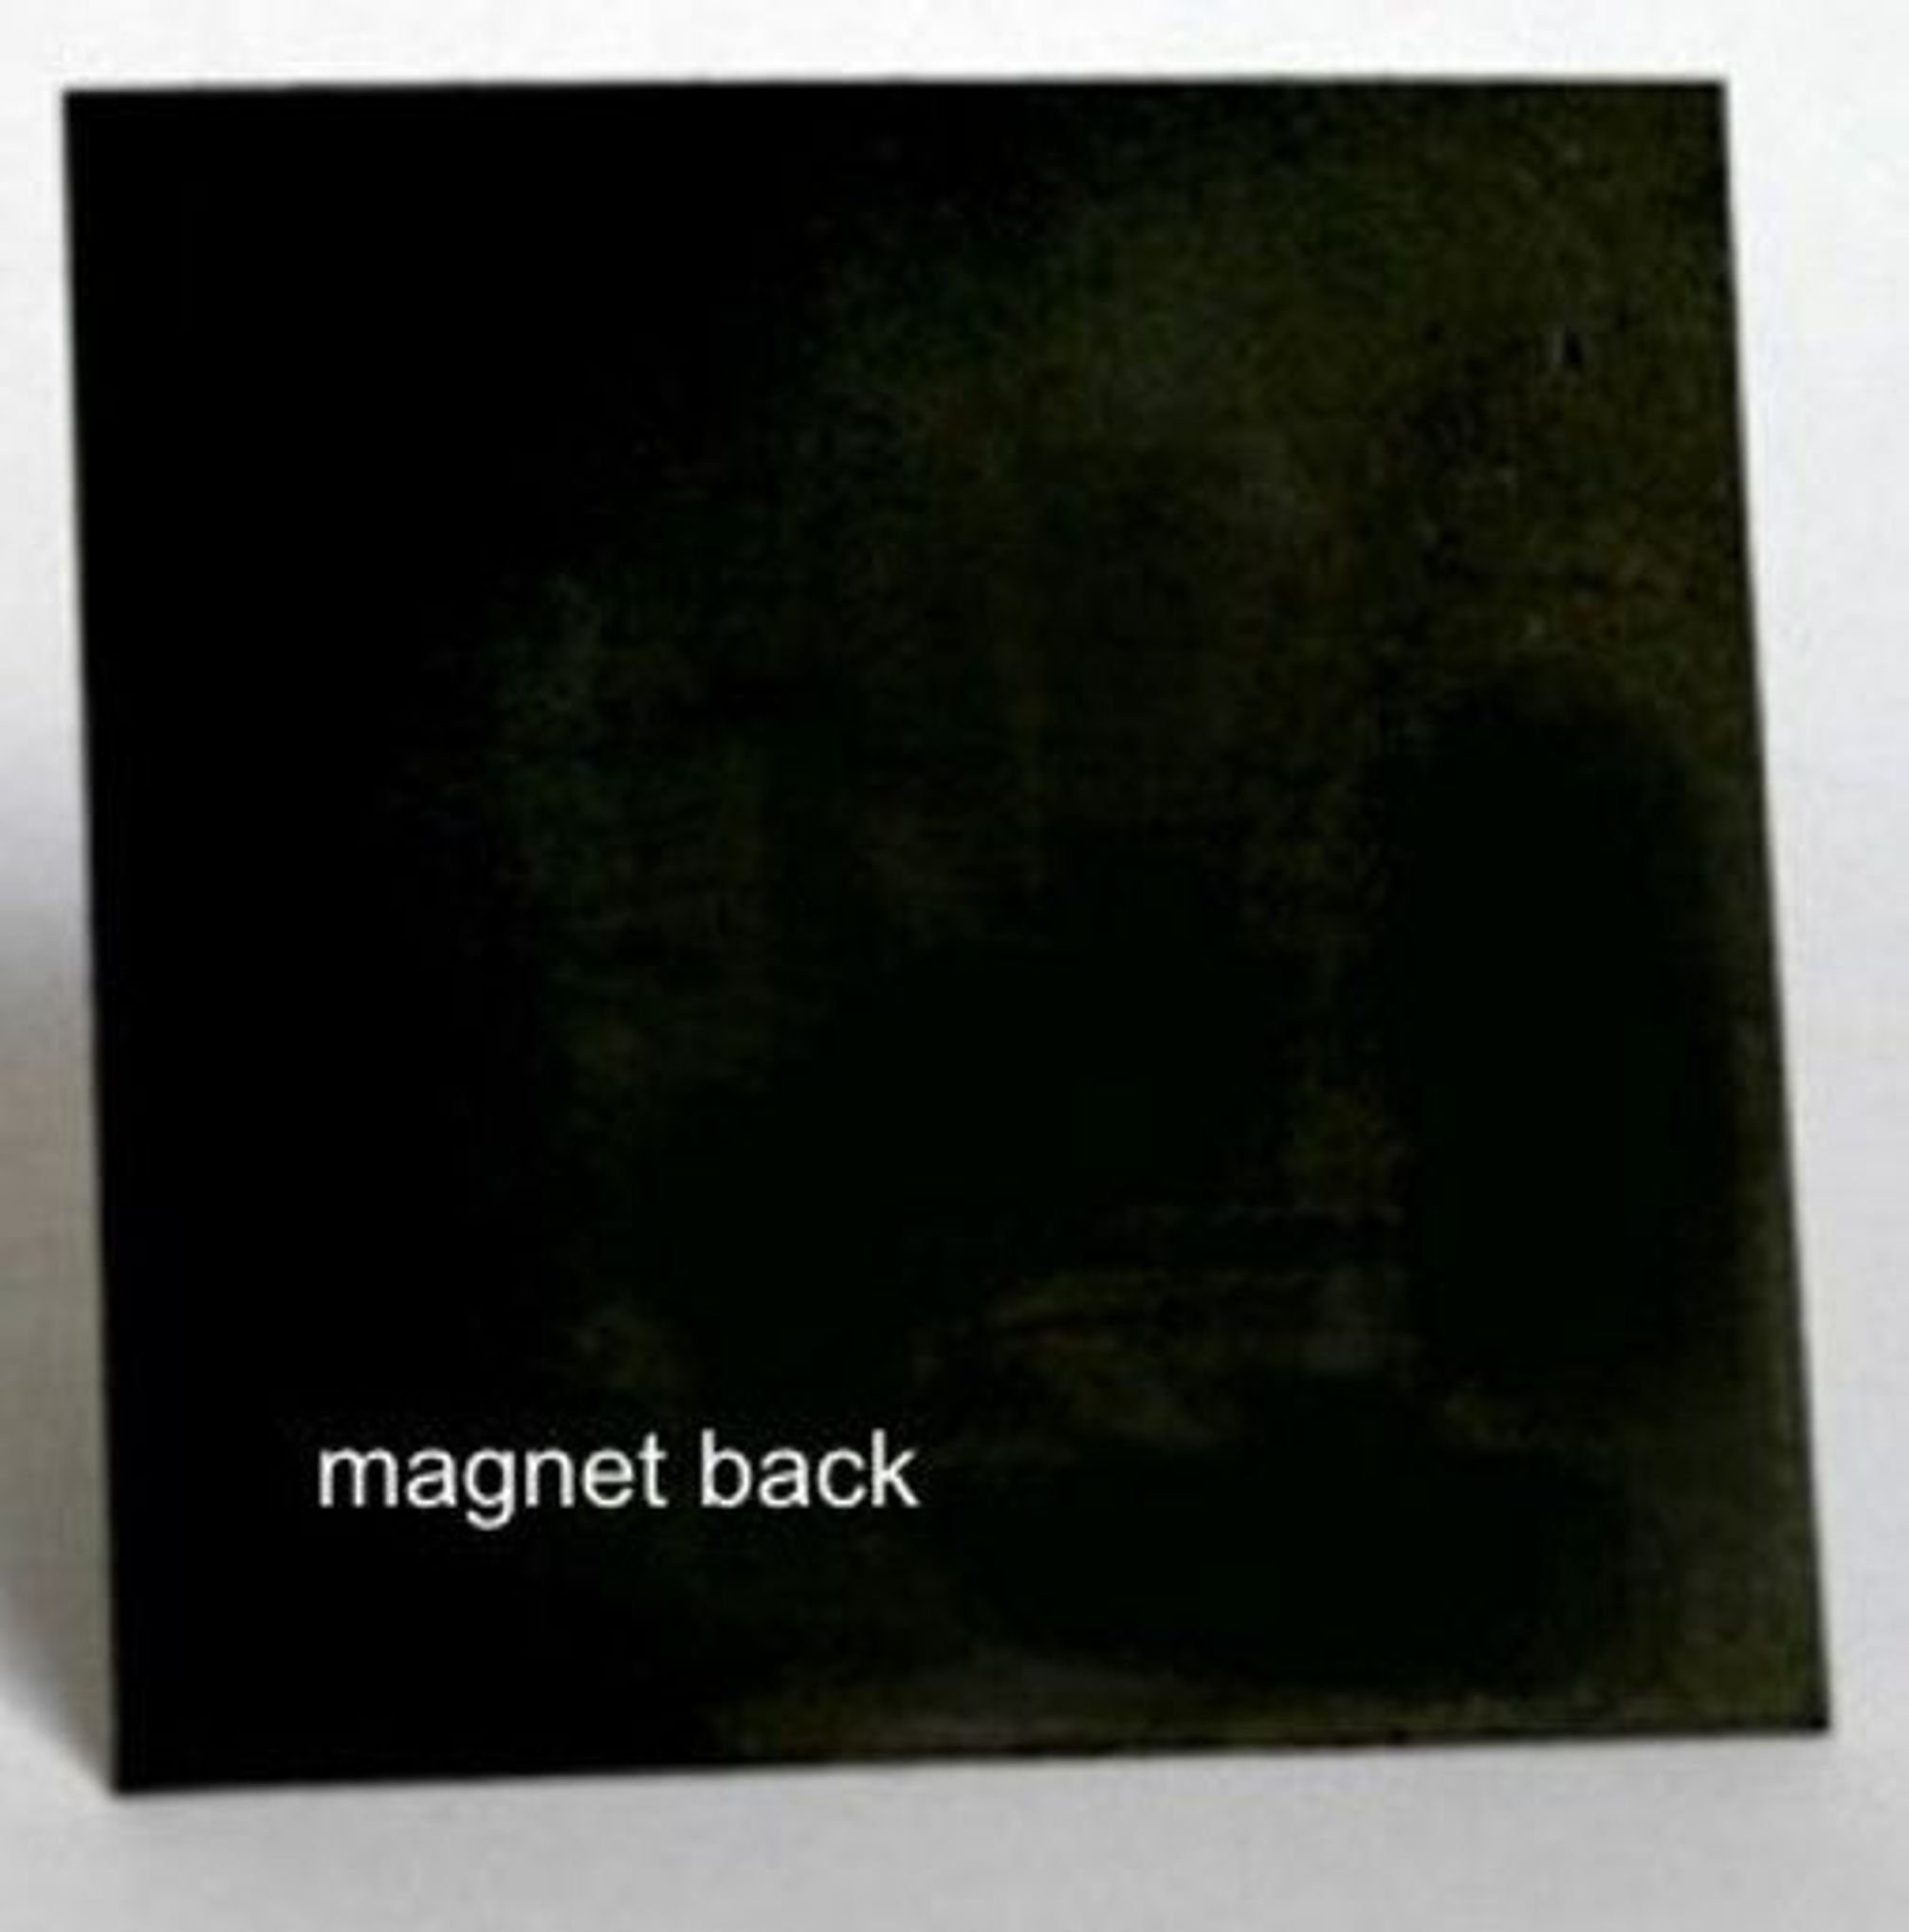 Magnetic Sheet from Abel Magnets